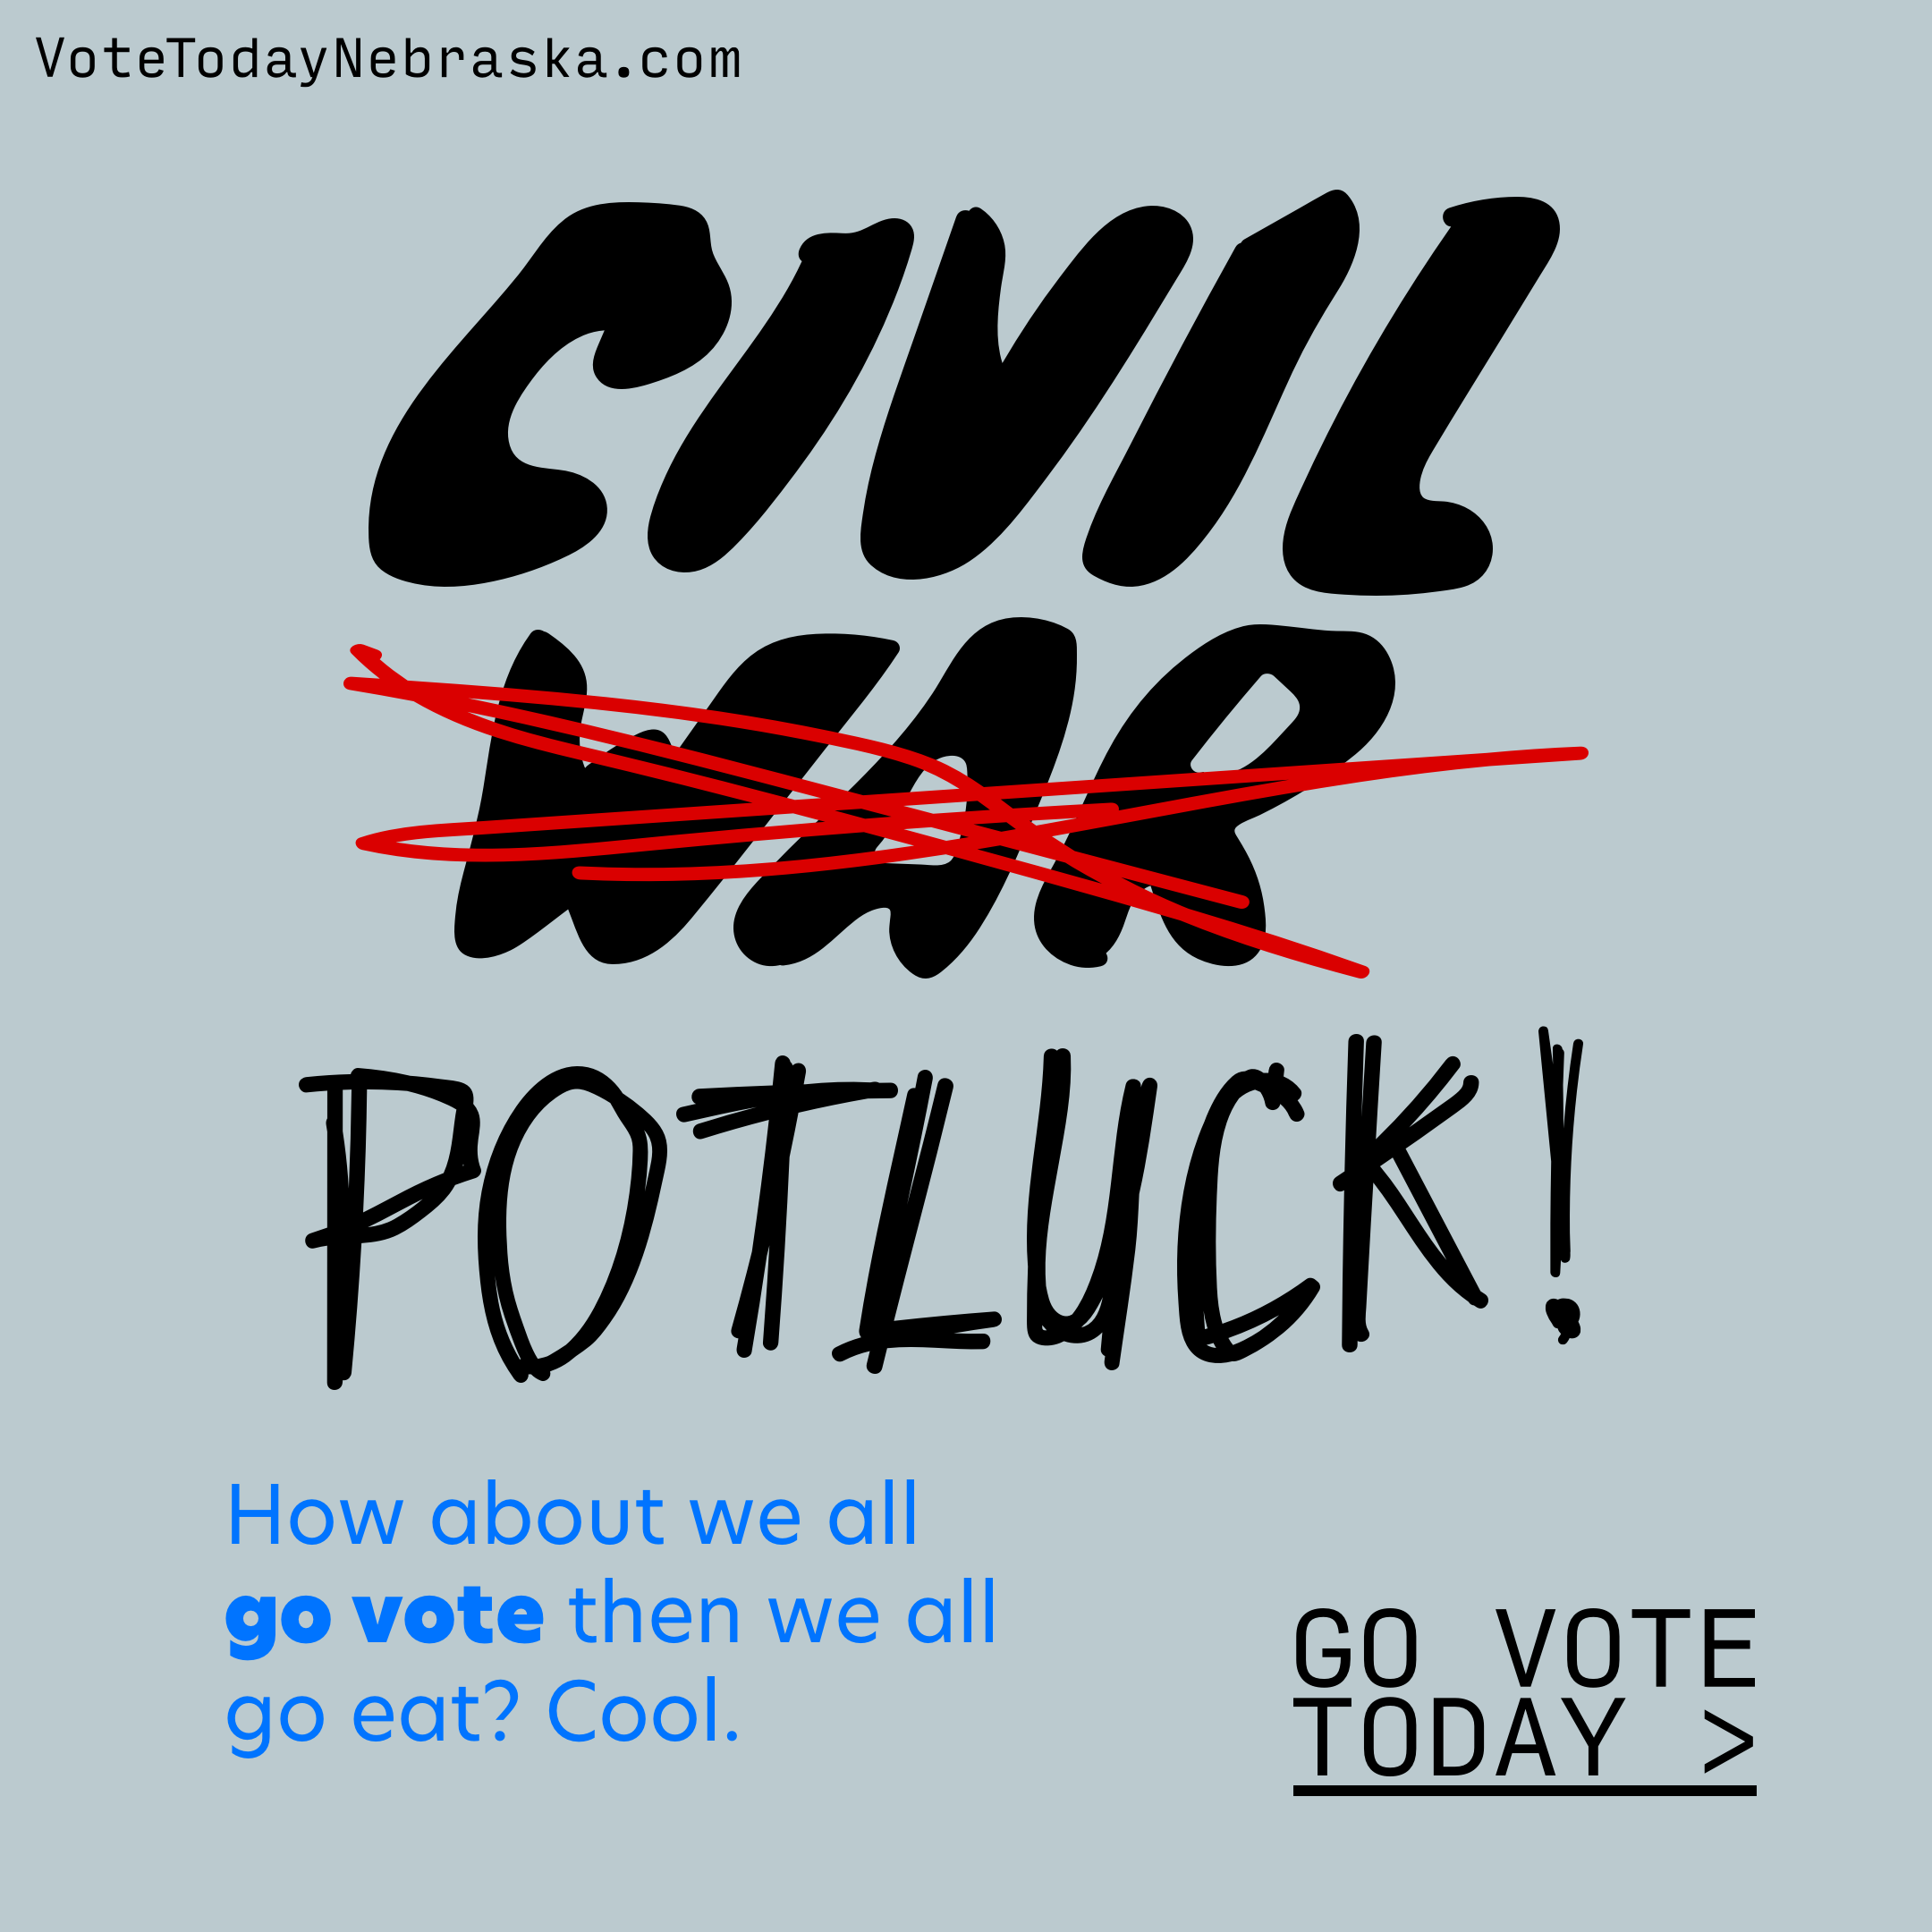 CIVIL (WAR crossed out) POTLUCK. How about we all go vote then we all go eat? Cool. Go Vote Today >